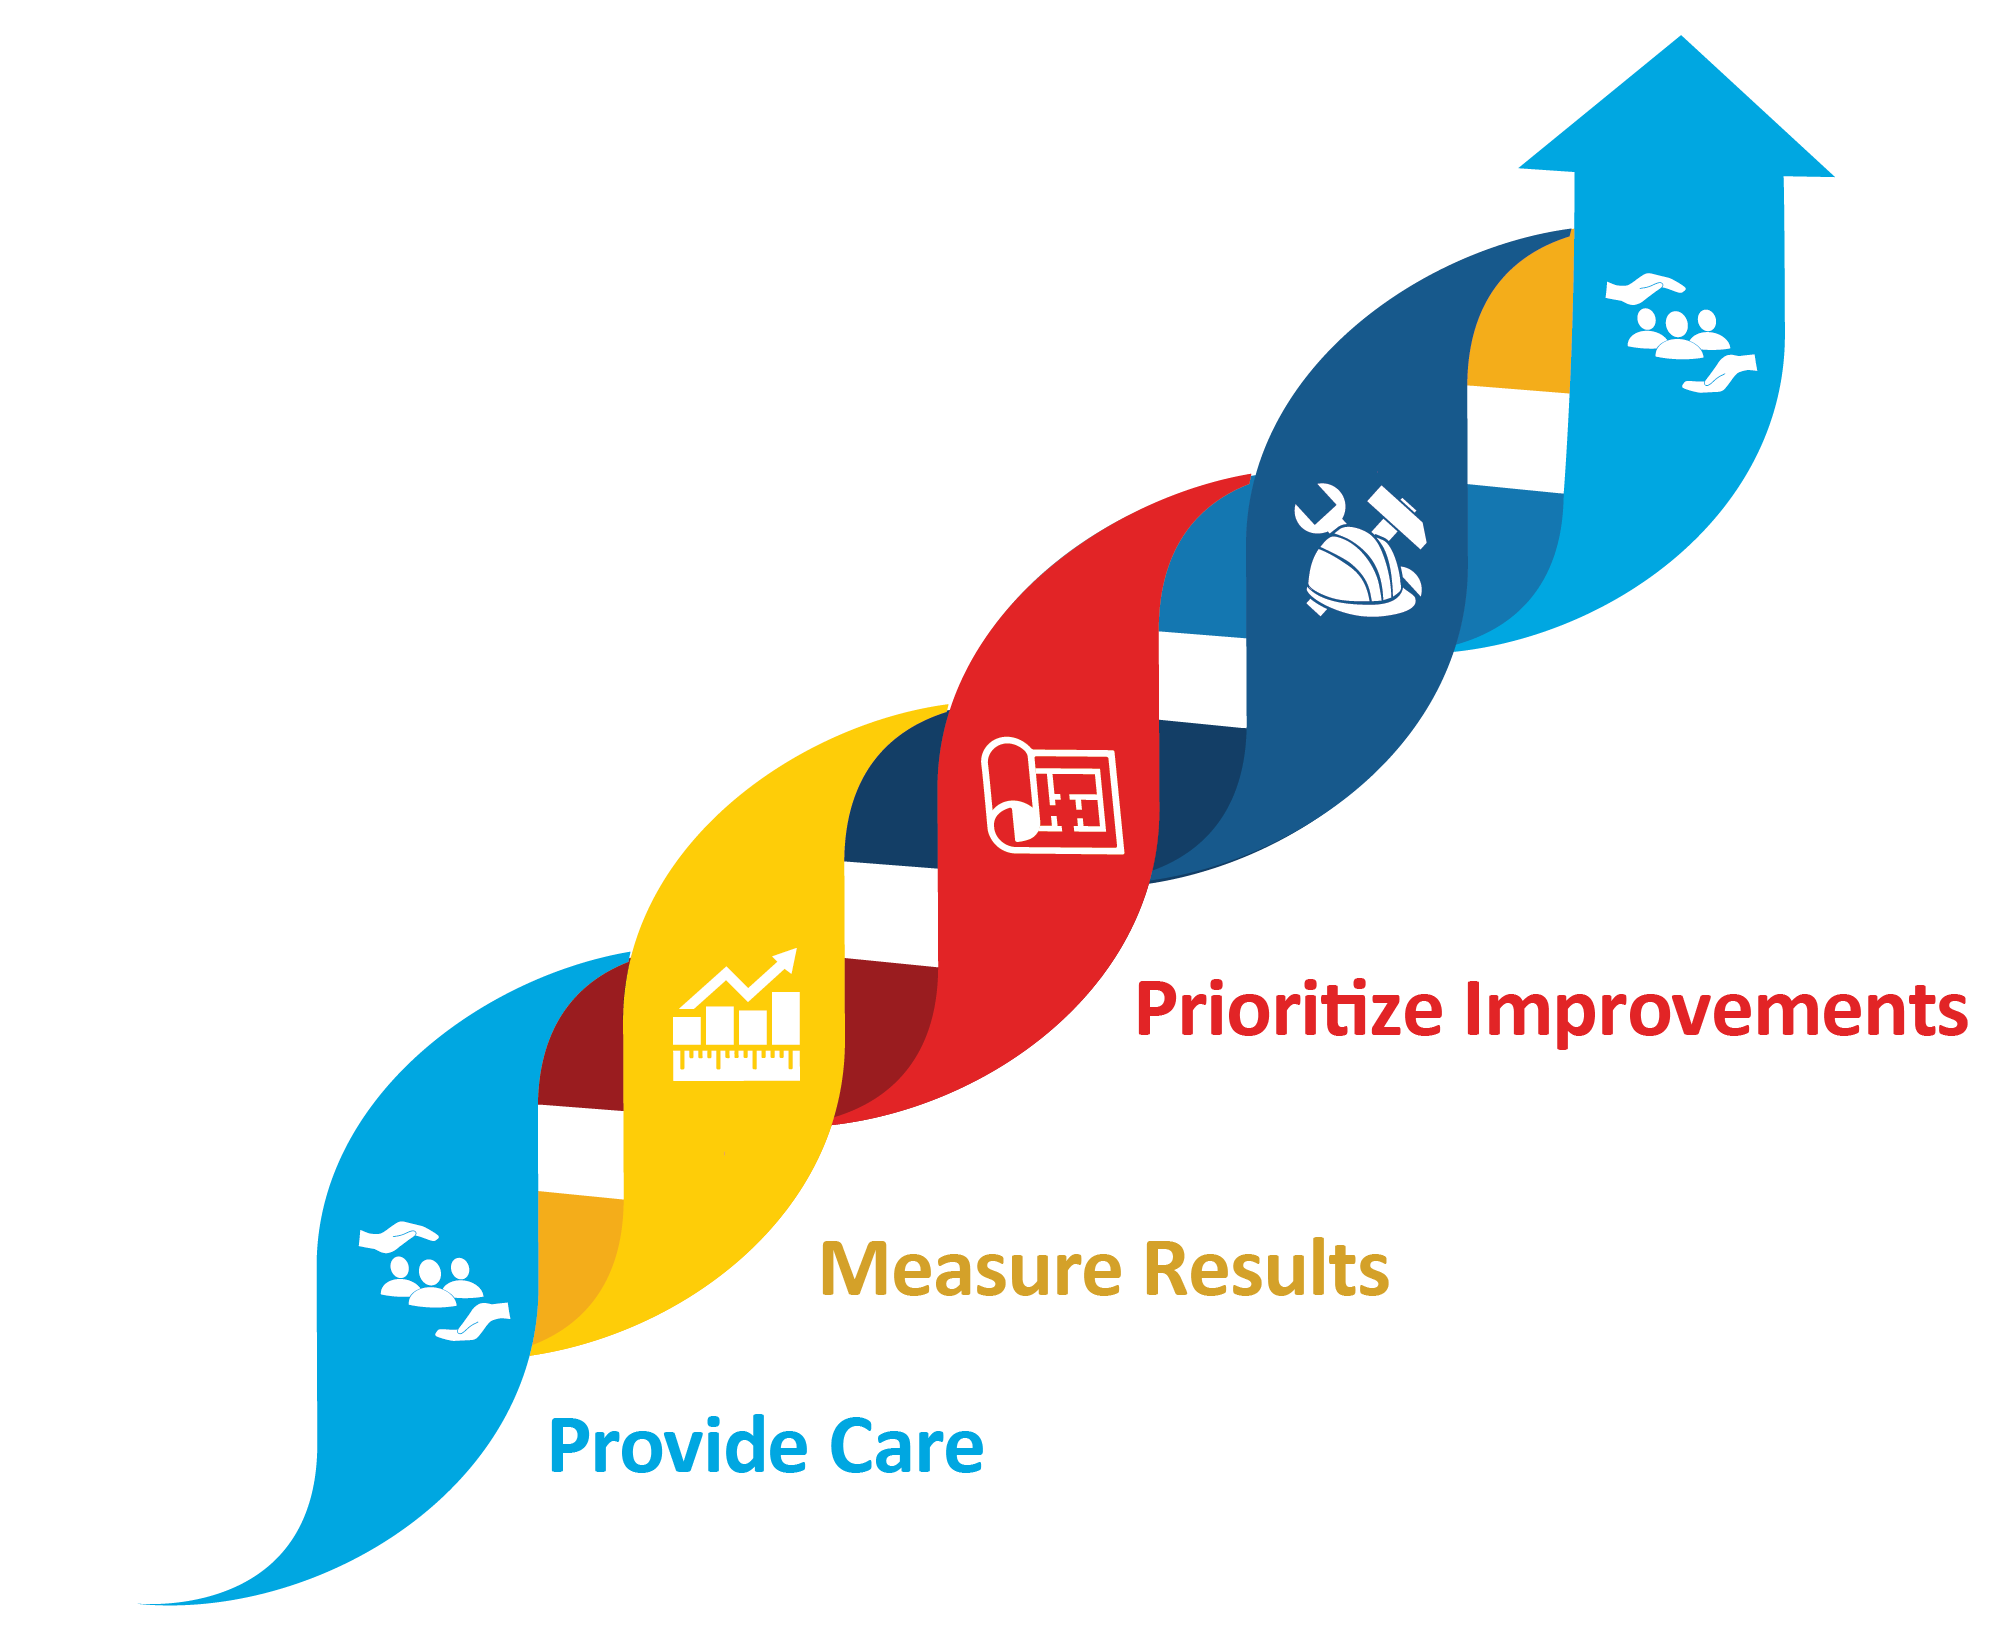 The continuous process to achieve optimal care: Provide care, Measure results, Plan improvements, and implement Improvements